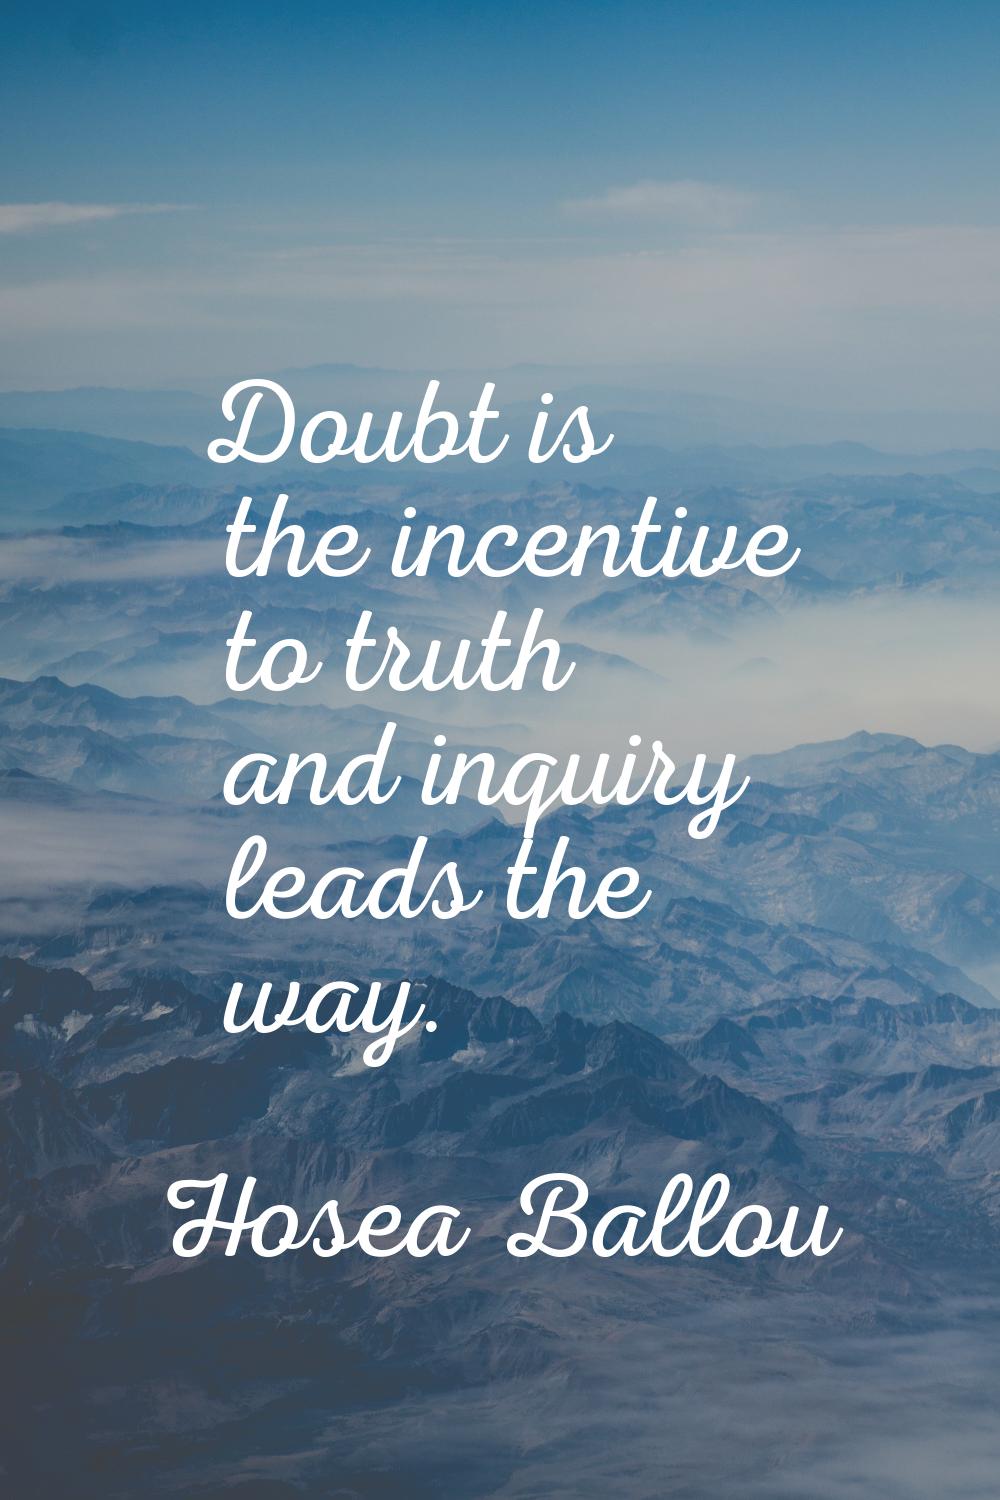 Doubt is the incentive to truth and inquiry leads the way.